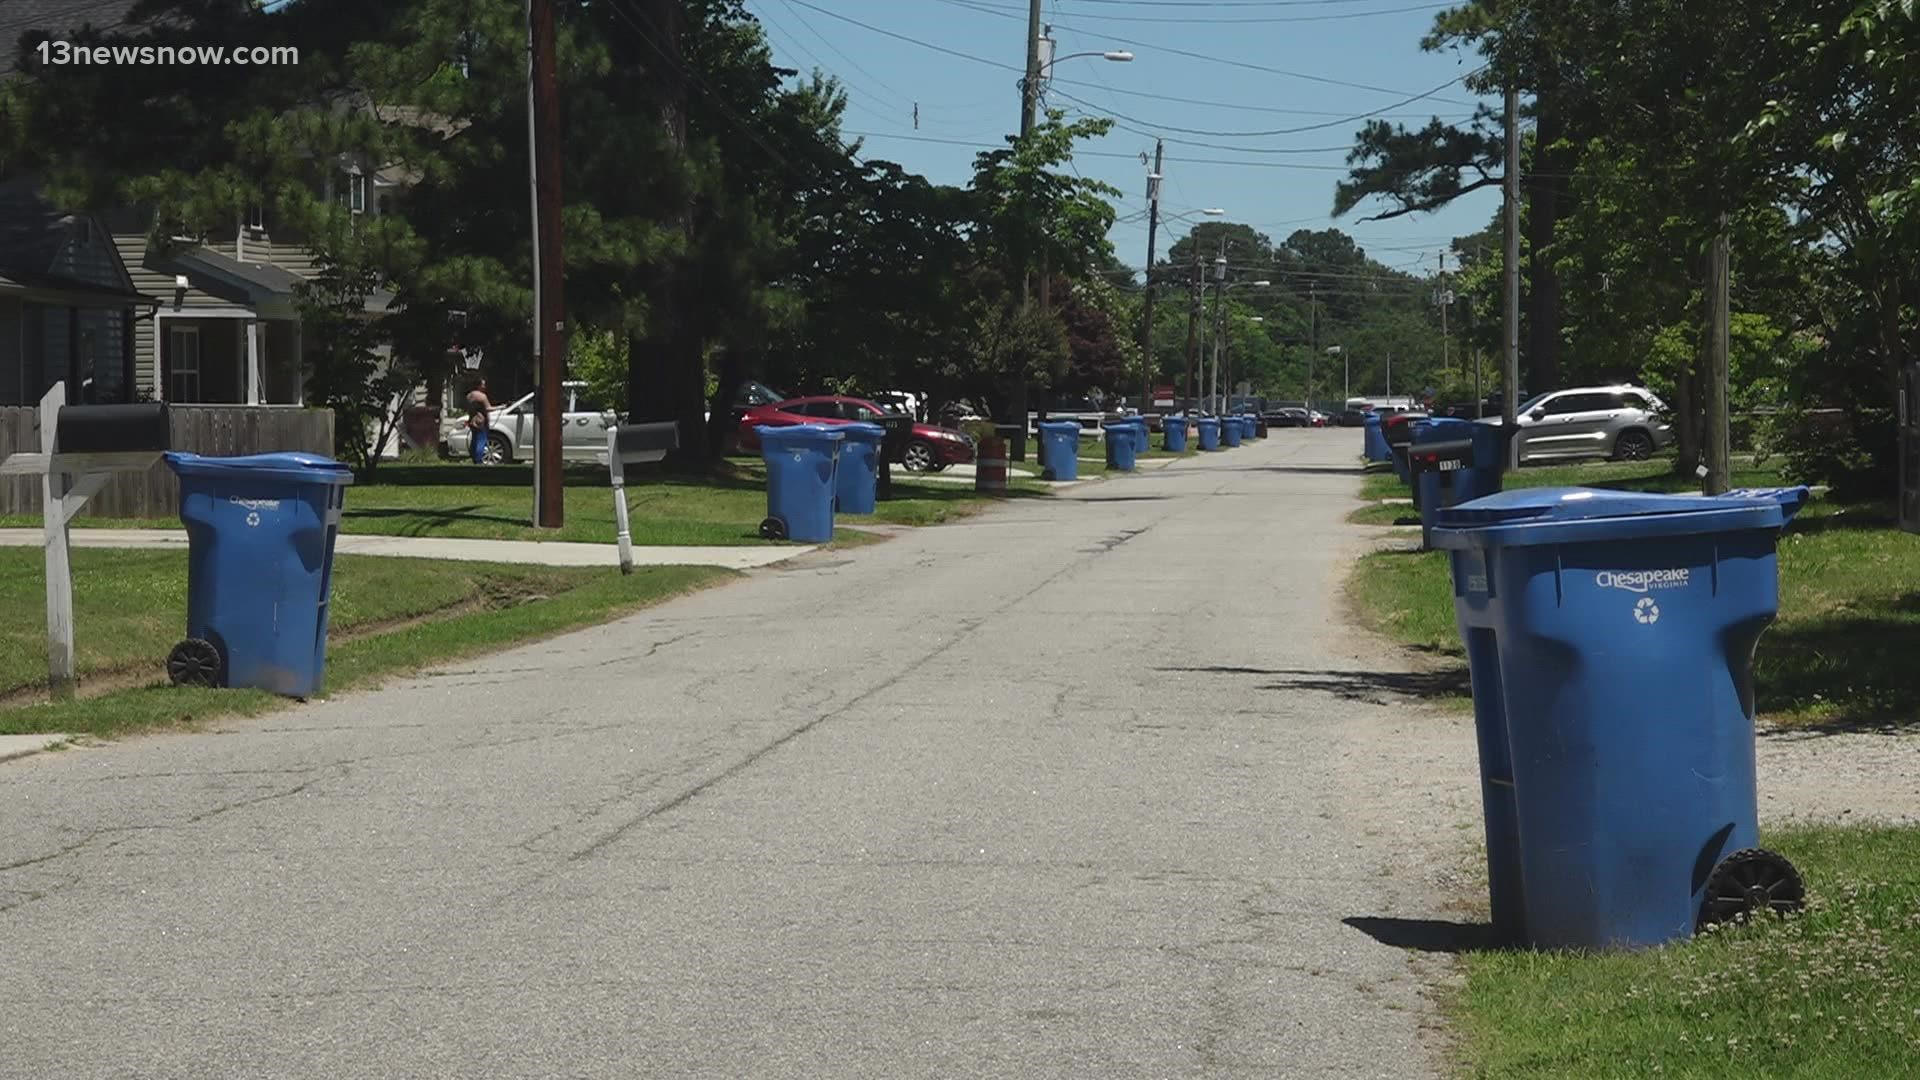 Residents are saying their recycling has piled up for weeks and time is running out. The city's program is up at the end of the month.